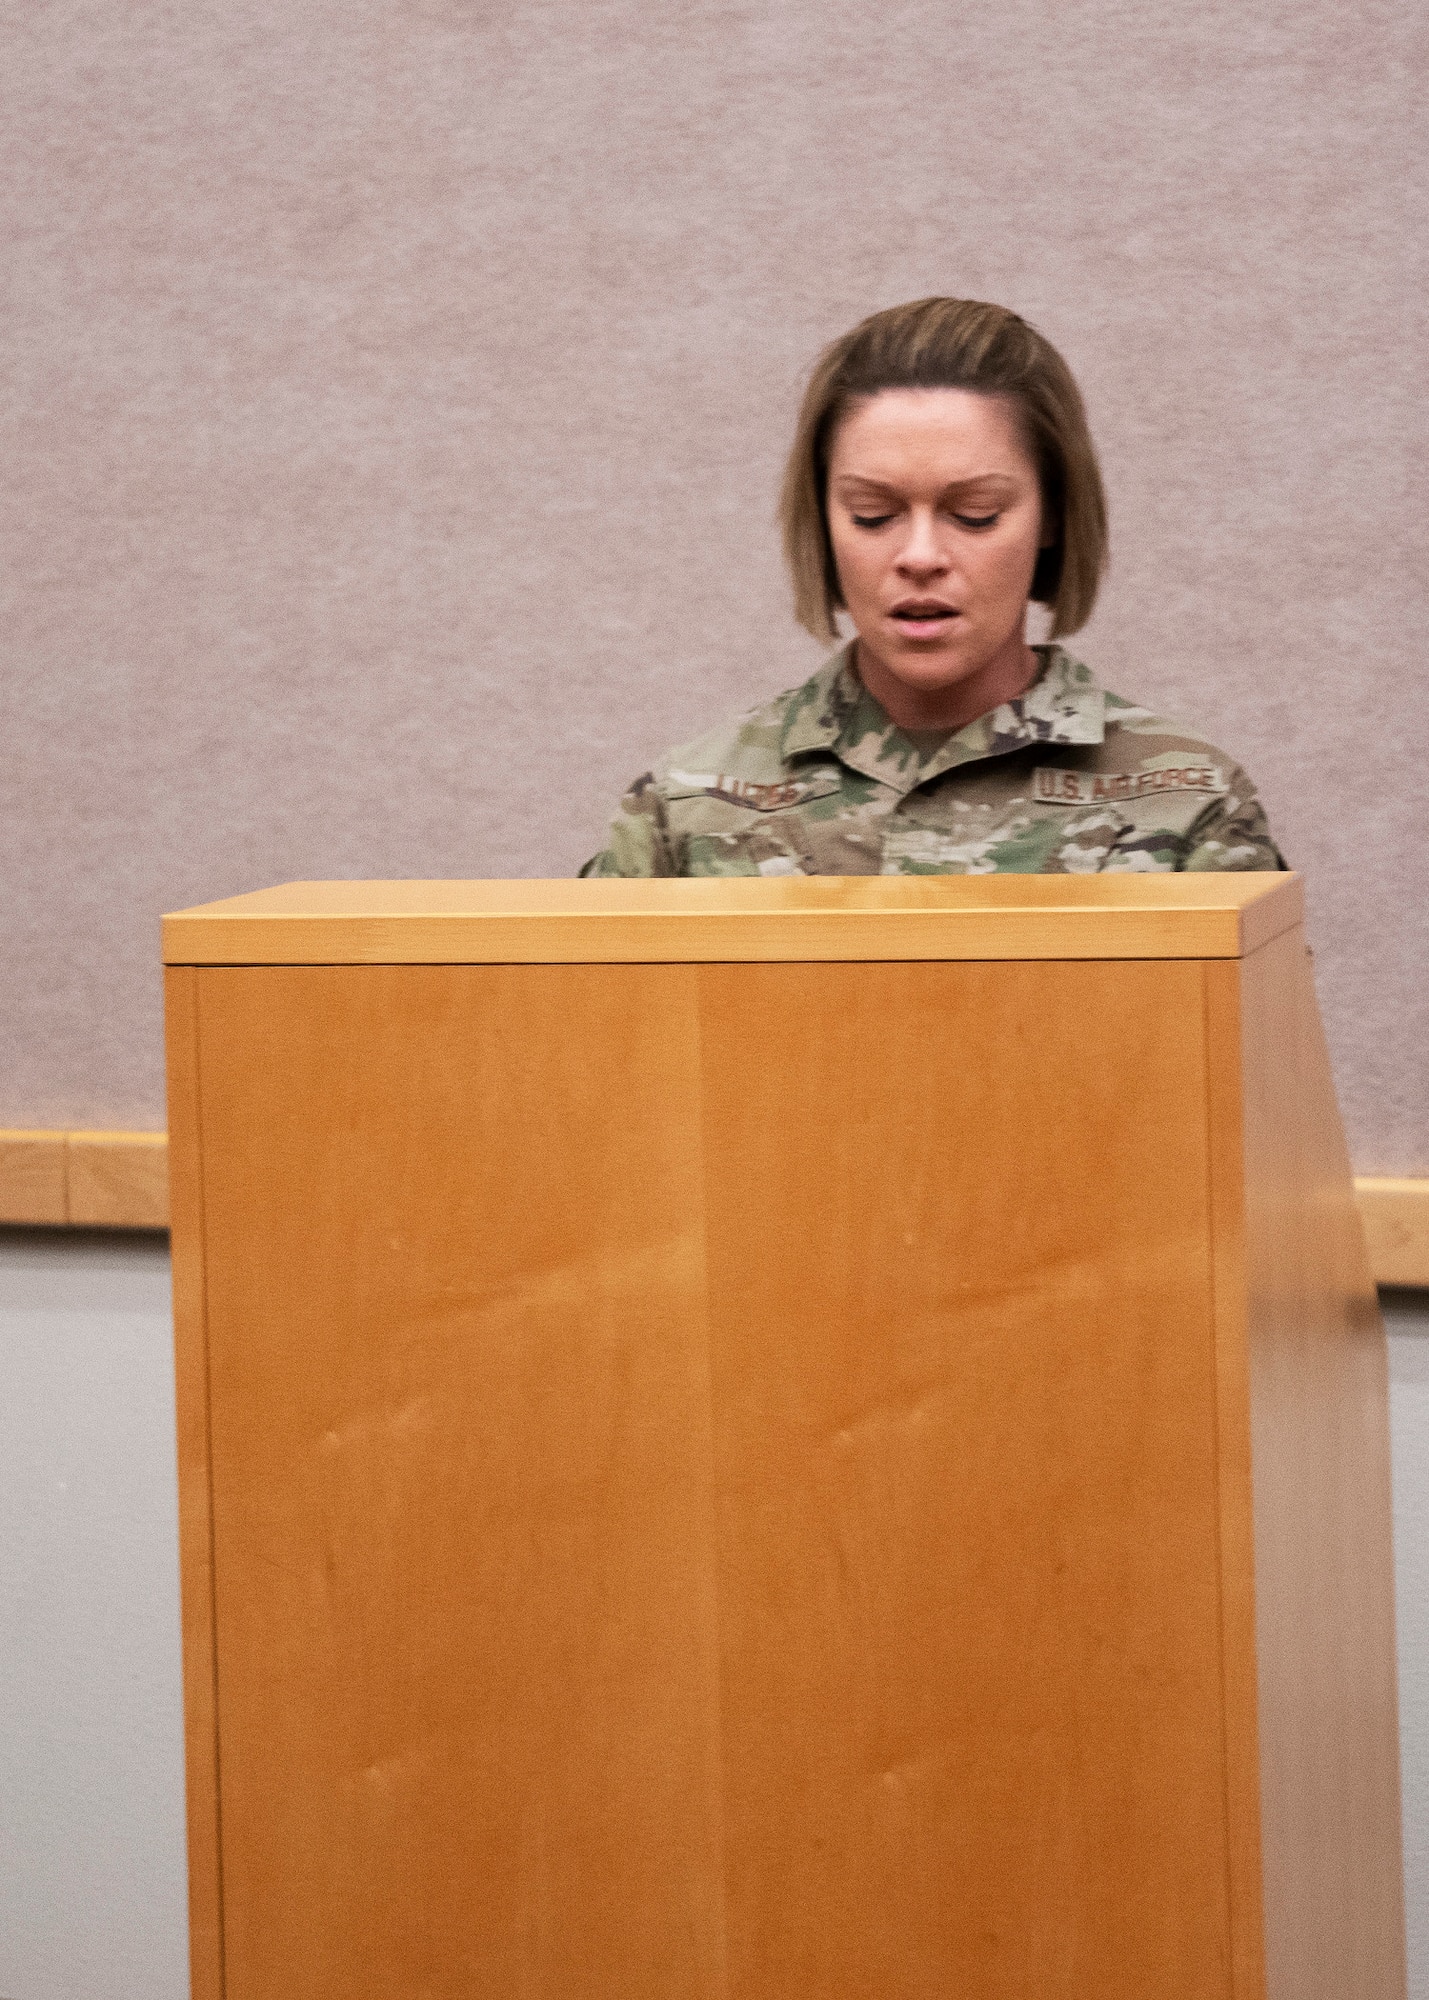 Tech. Sgt. Briana Lutes, event coordinator for the Senior Non-commissioned Officer Induction Ceremony, opens the event with a speech on Whiteman Air Force Base, Missouri, March 6, 2021. The ceremony recognizes Airmen who have recently been promoted into the first tier of the SNCO ranks. (U.S. Air National Guard photo by Airman 1st Class Whitney Erhart)